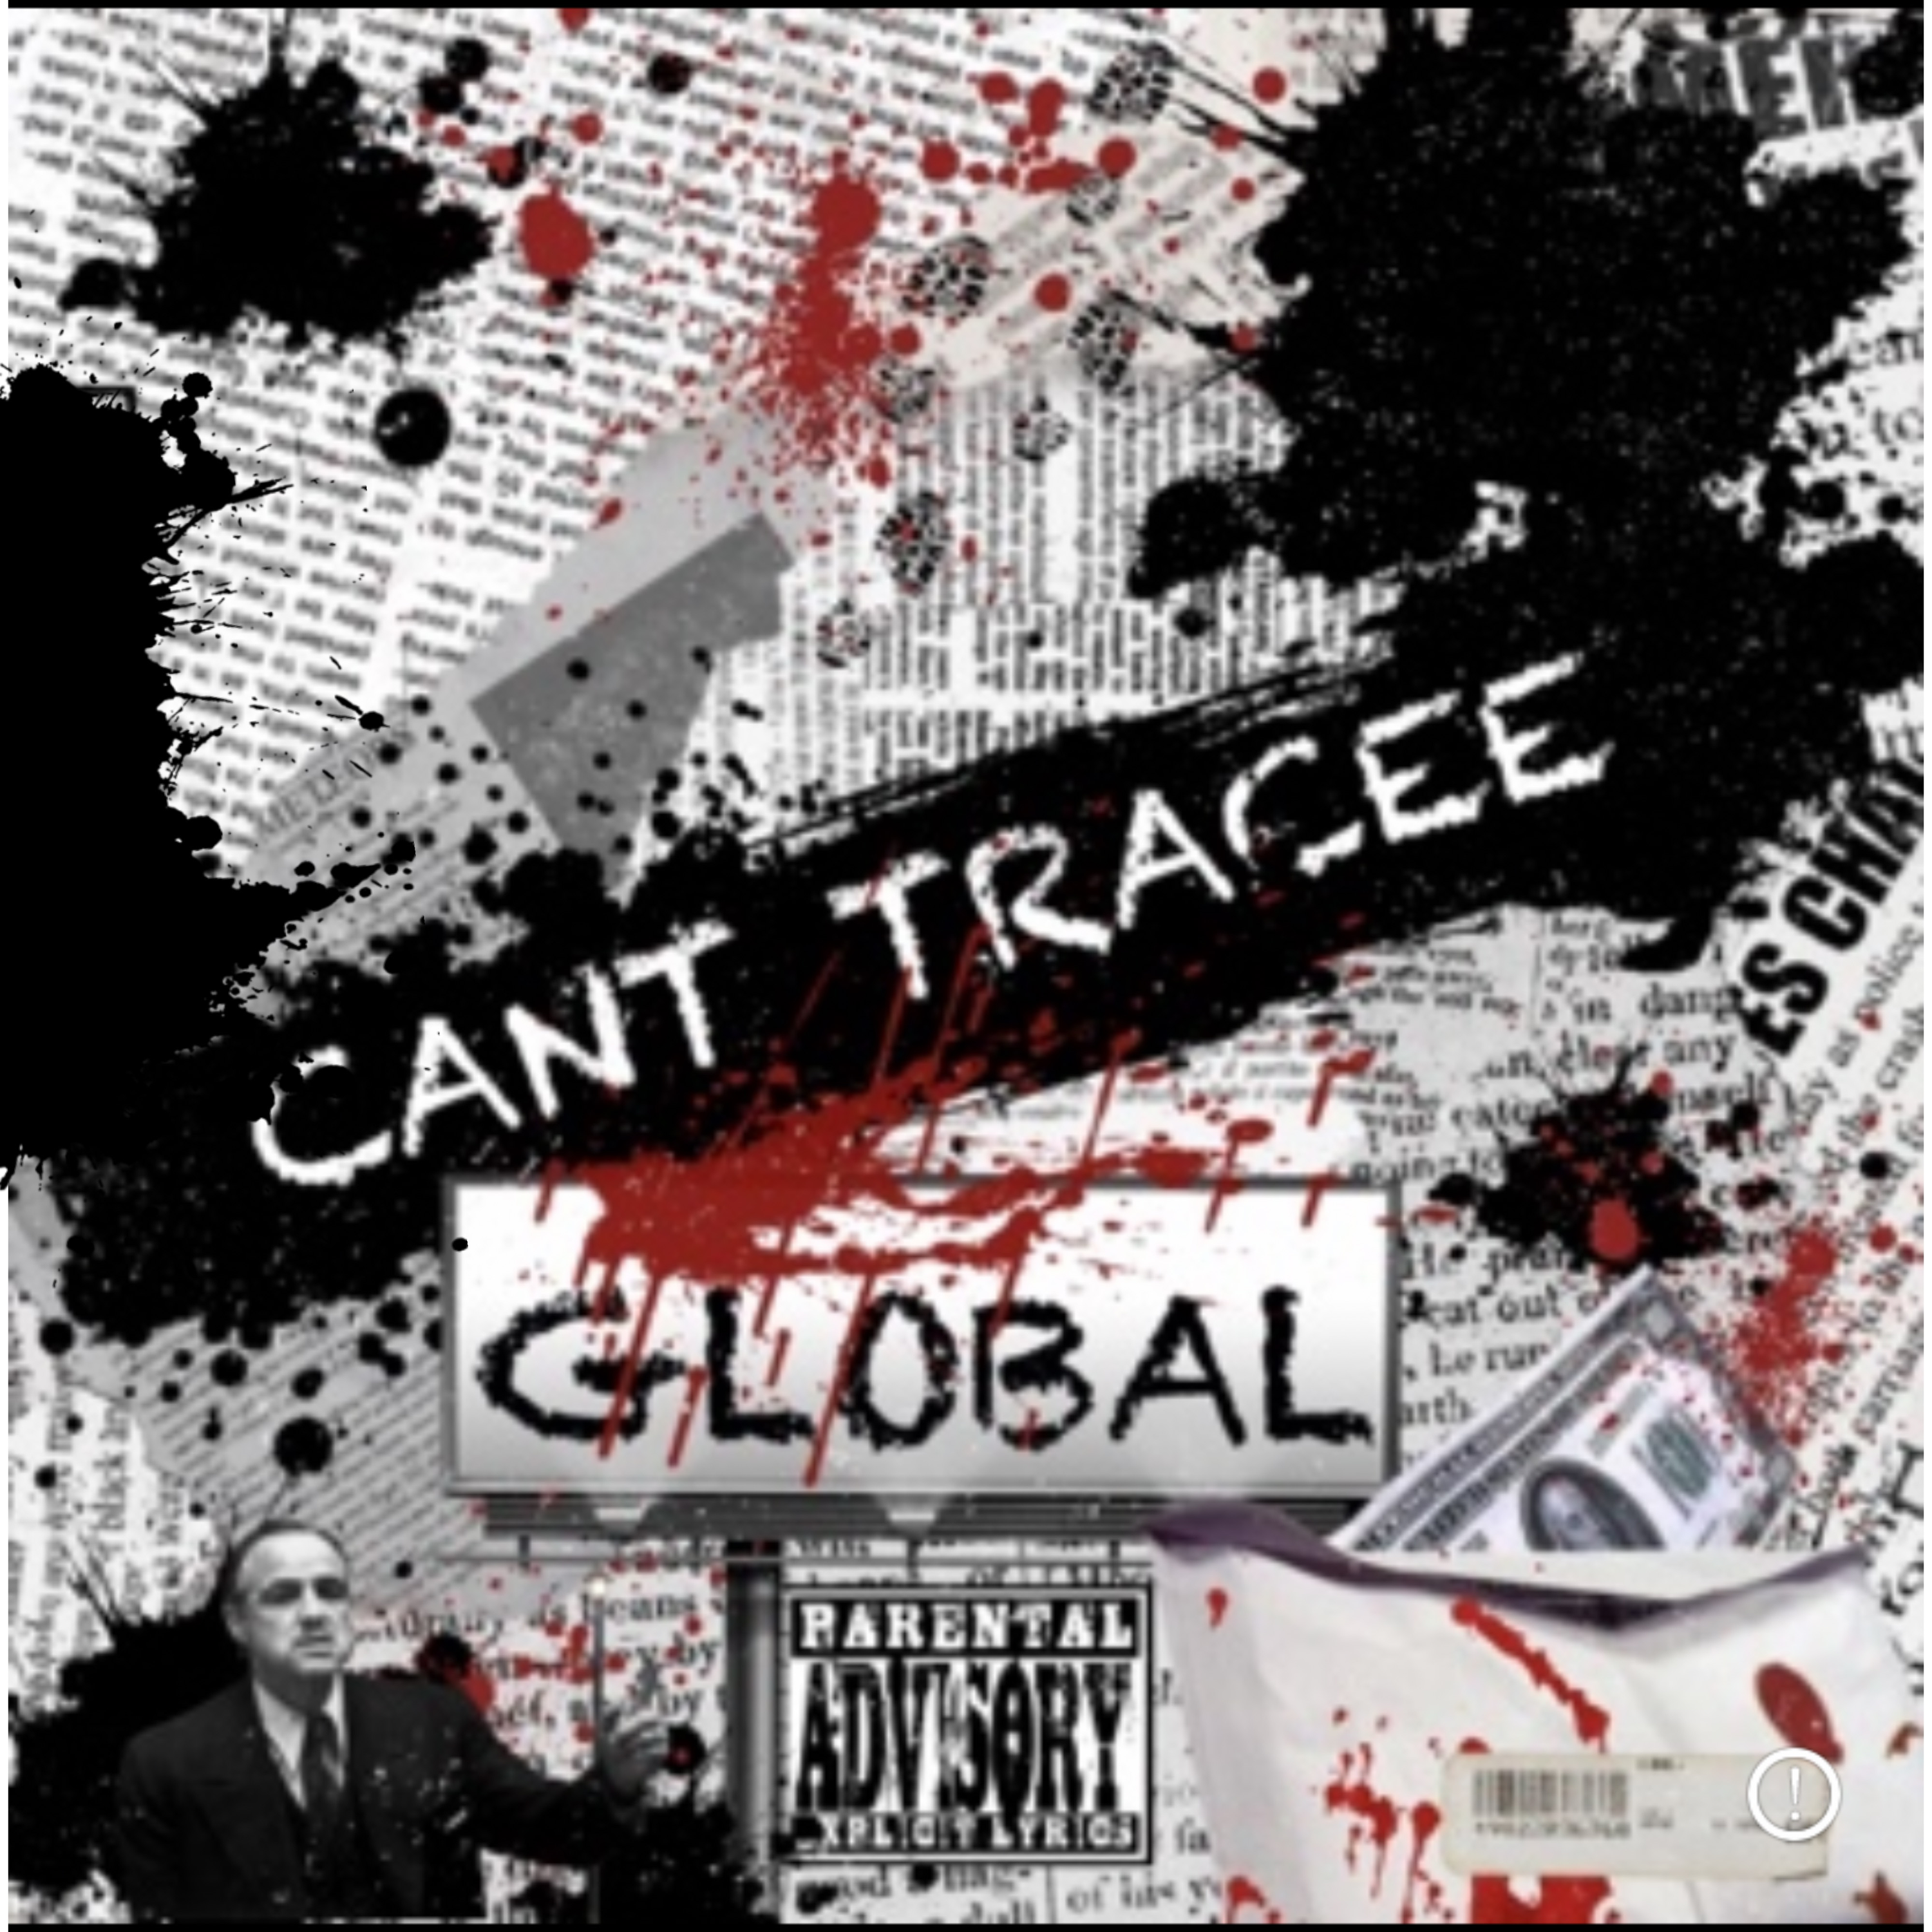 Global - cant tracee 2